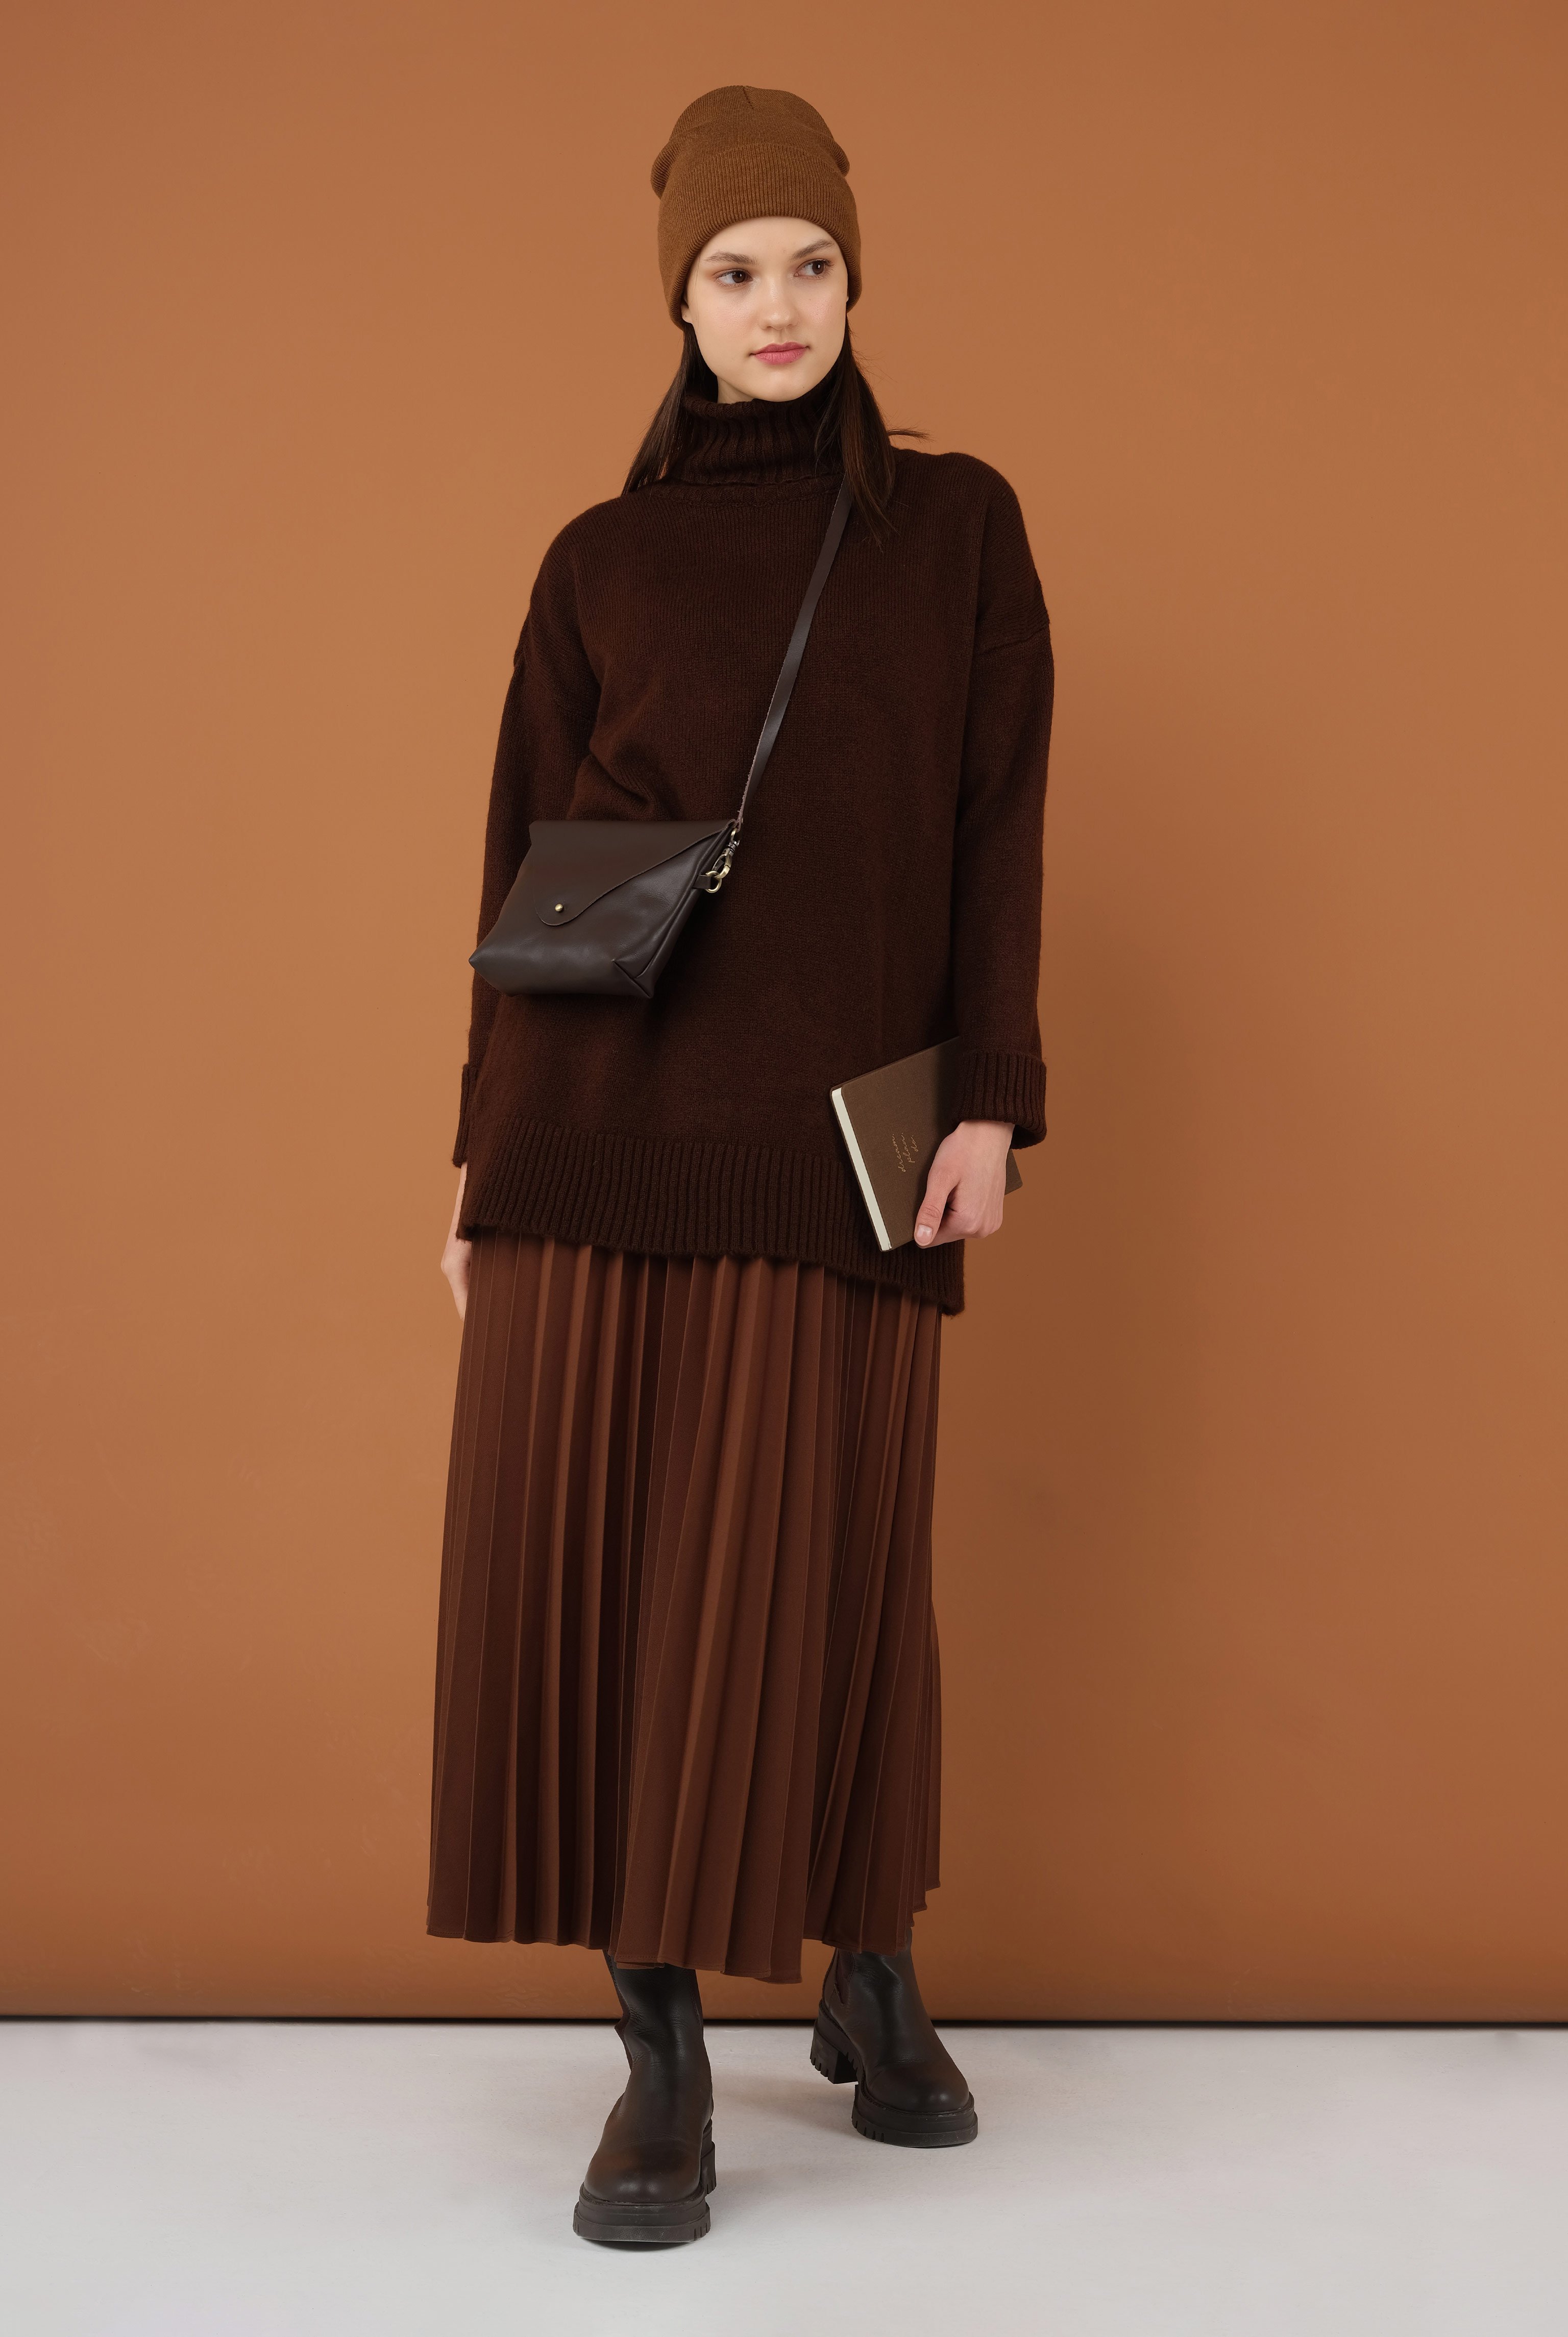 Soft Leather Bag Brown 